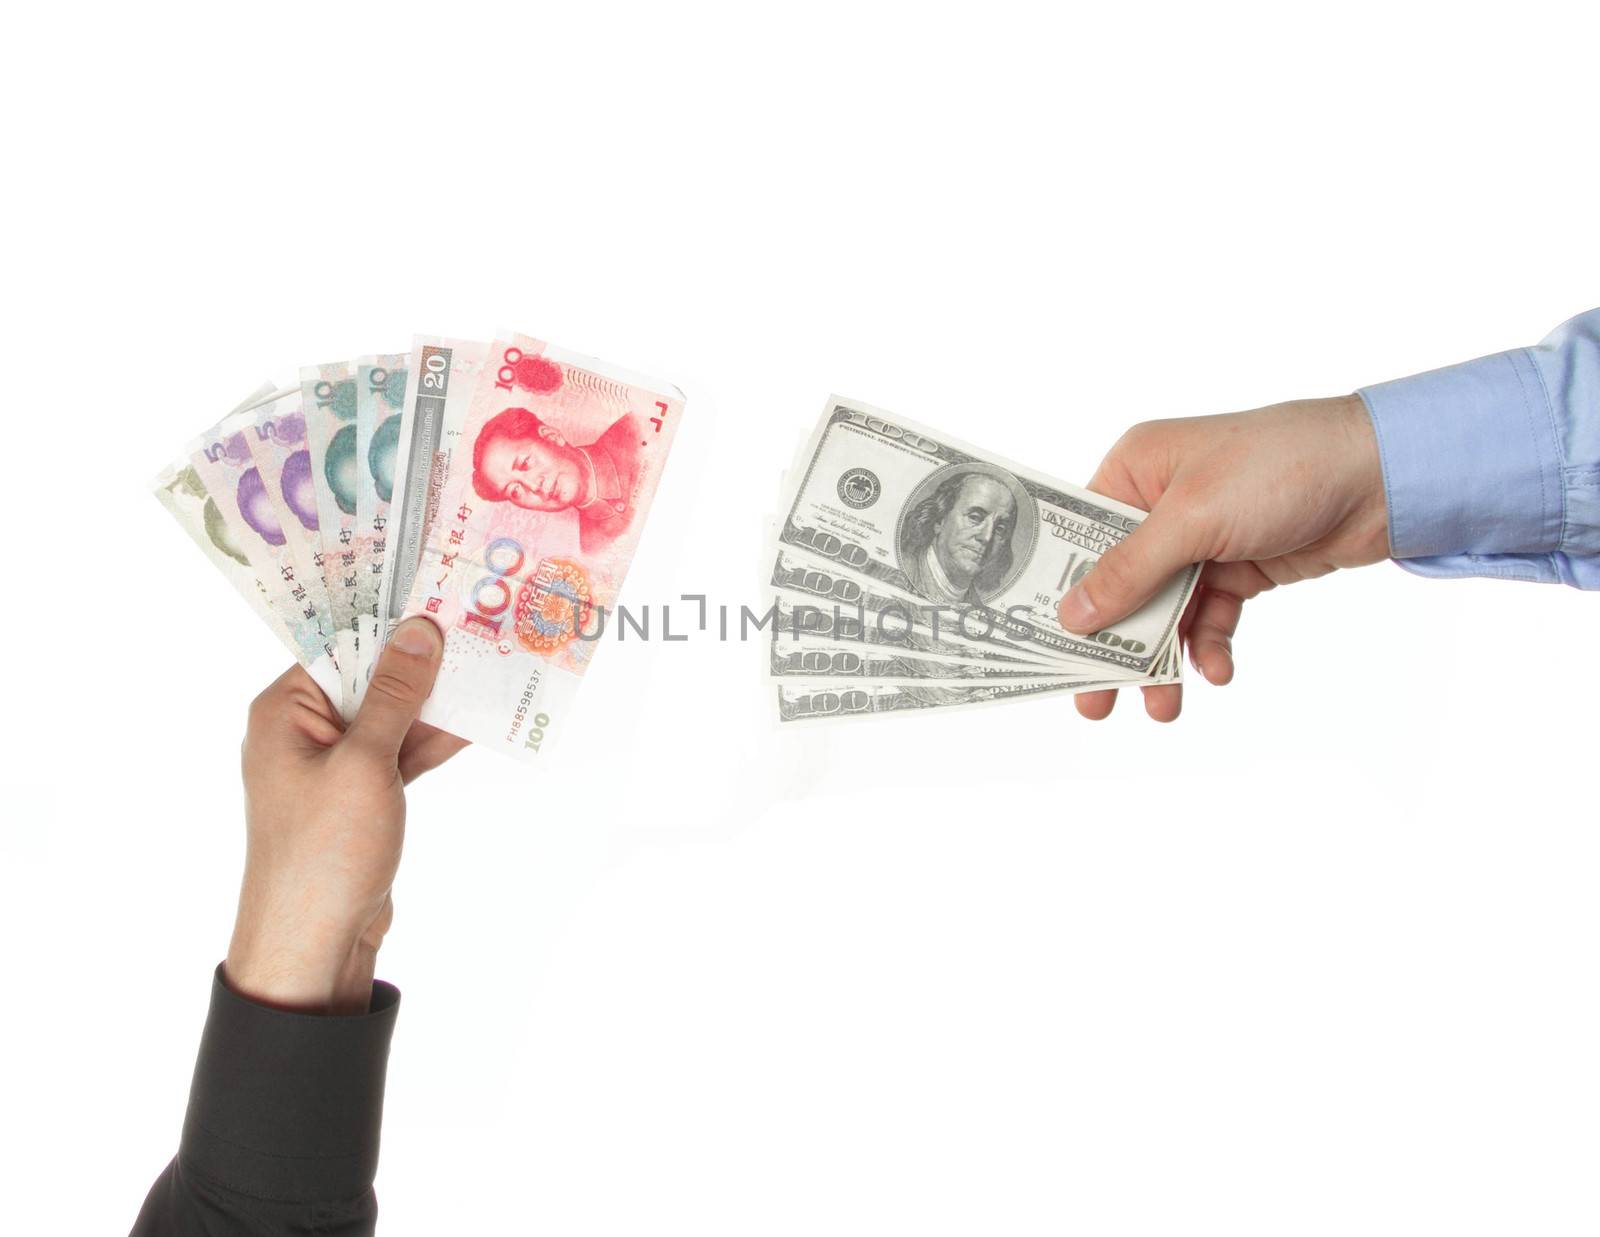 Hands holding yuan and dollar bills by shutswis